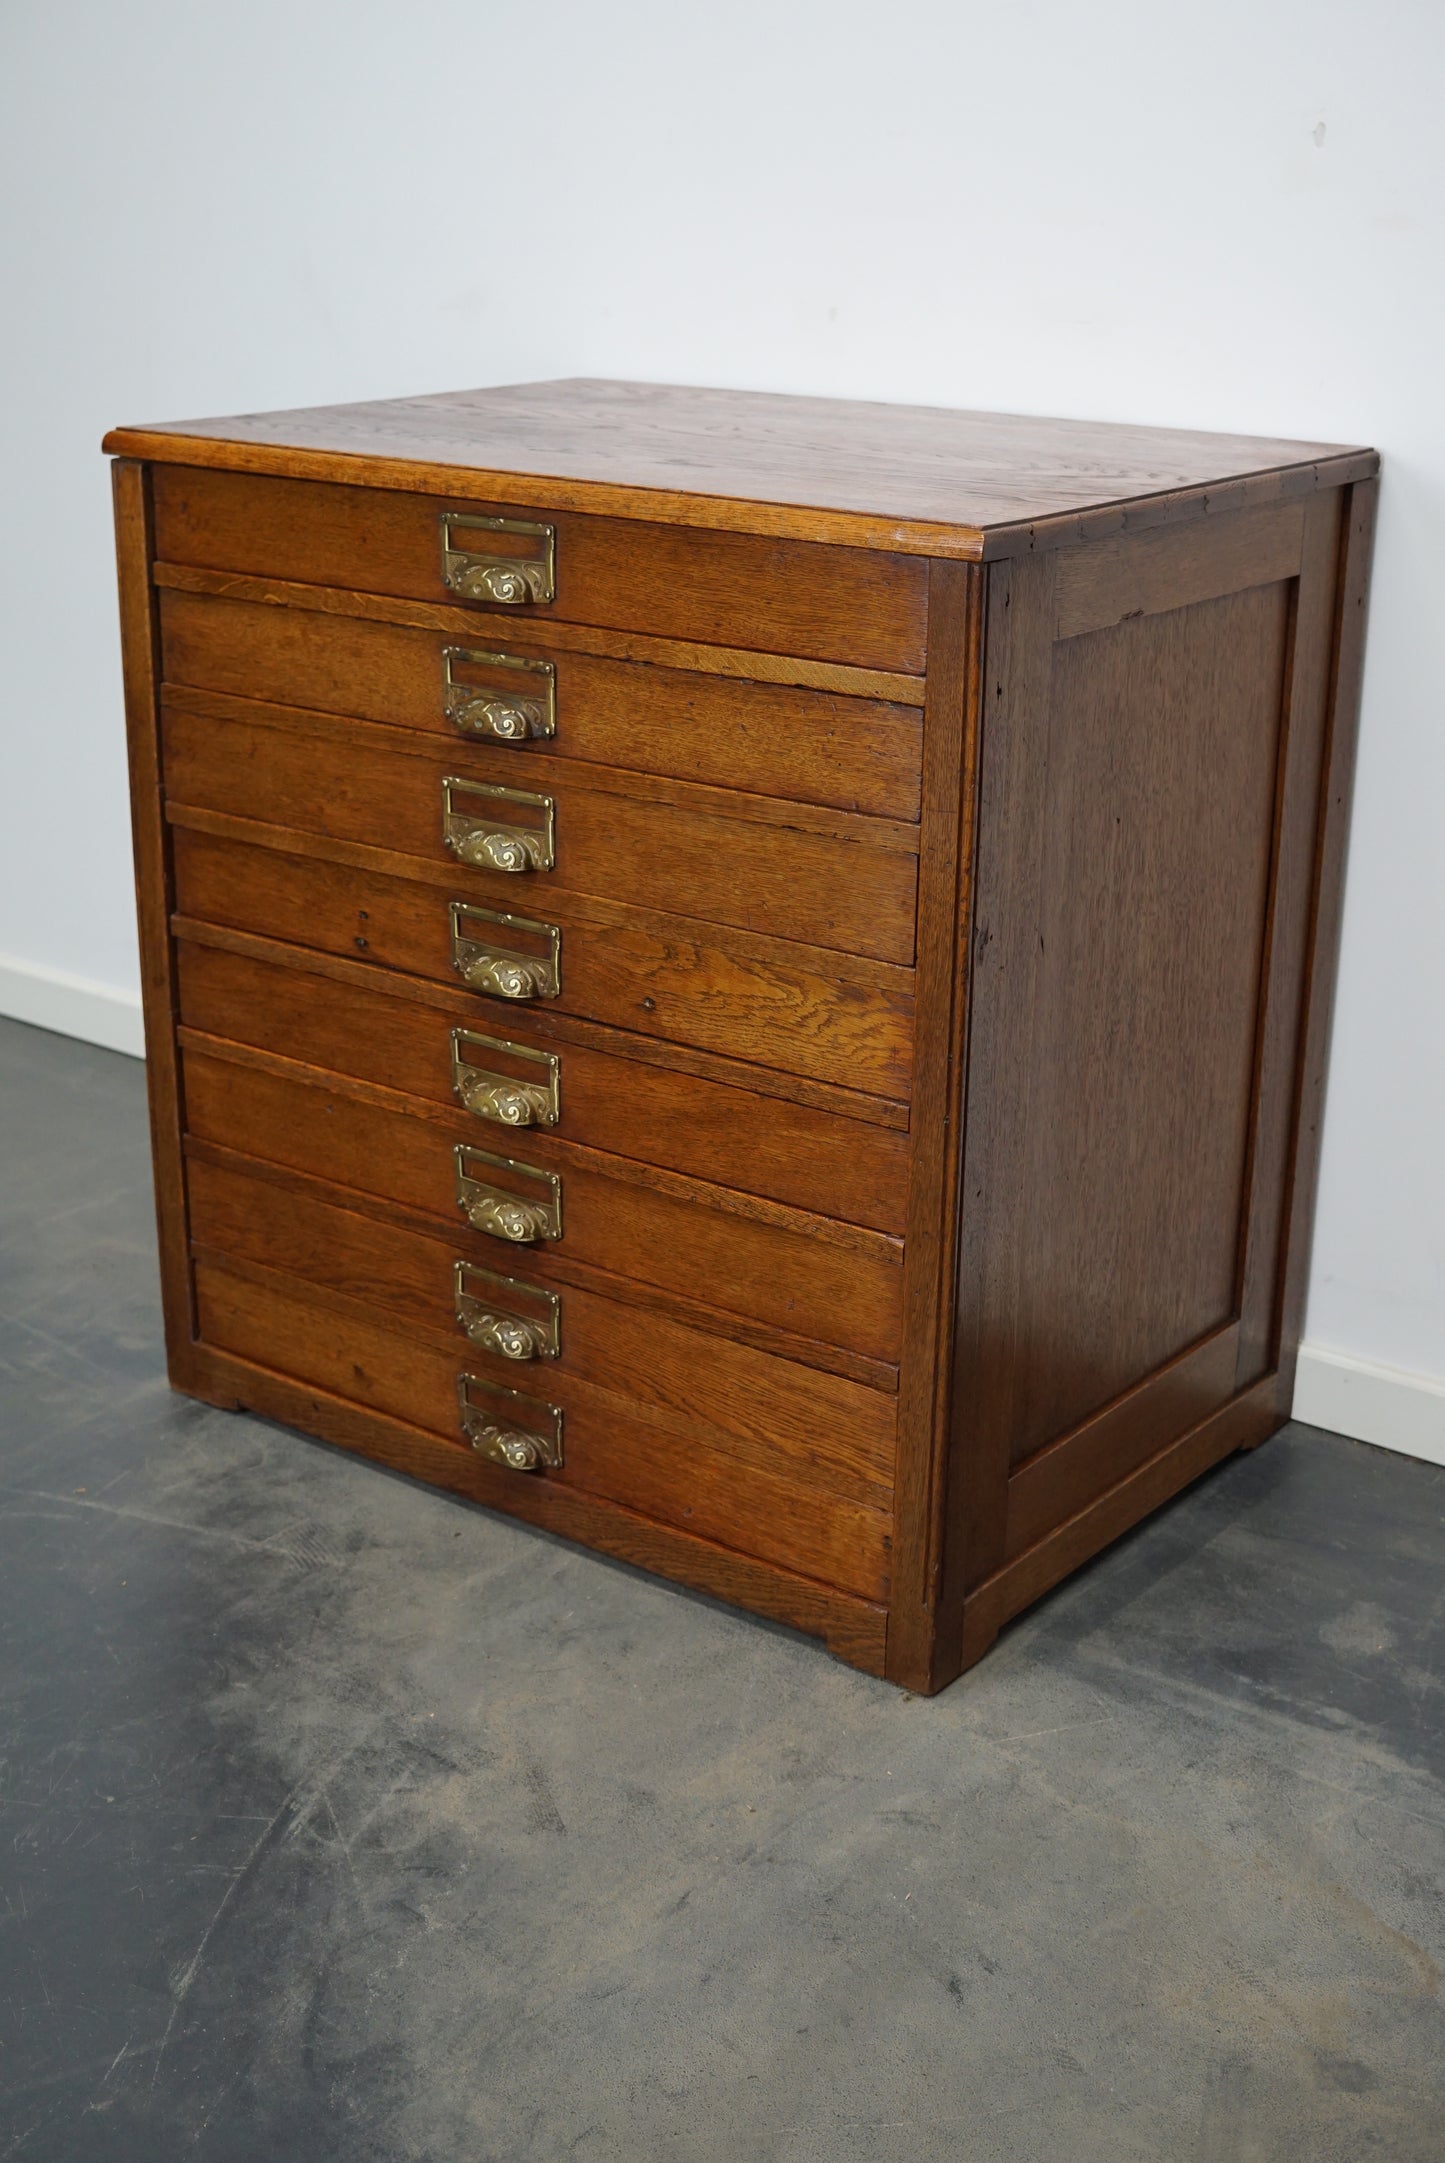 Dutch Oak Apothecary Cabinet / Plan Chest, Early 20th Century